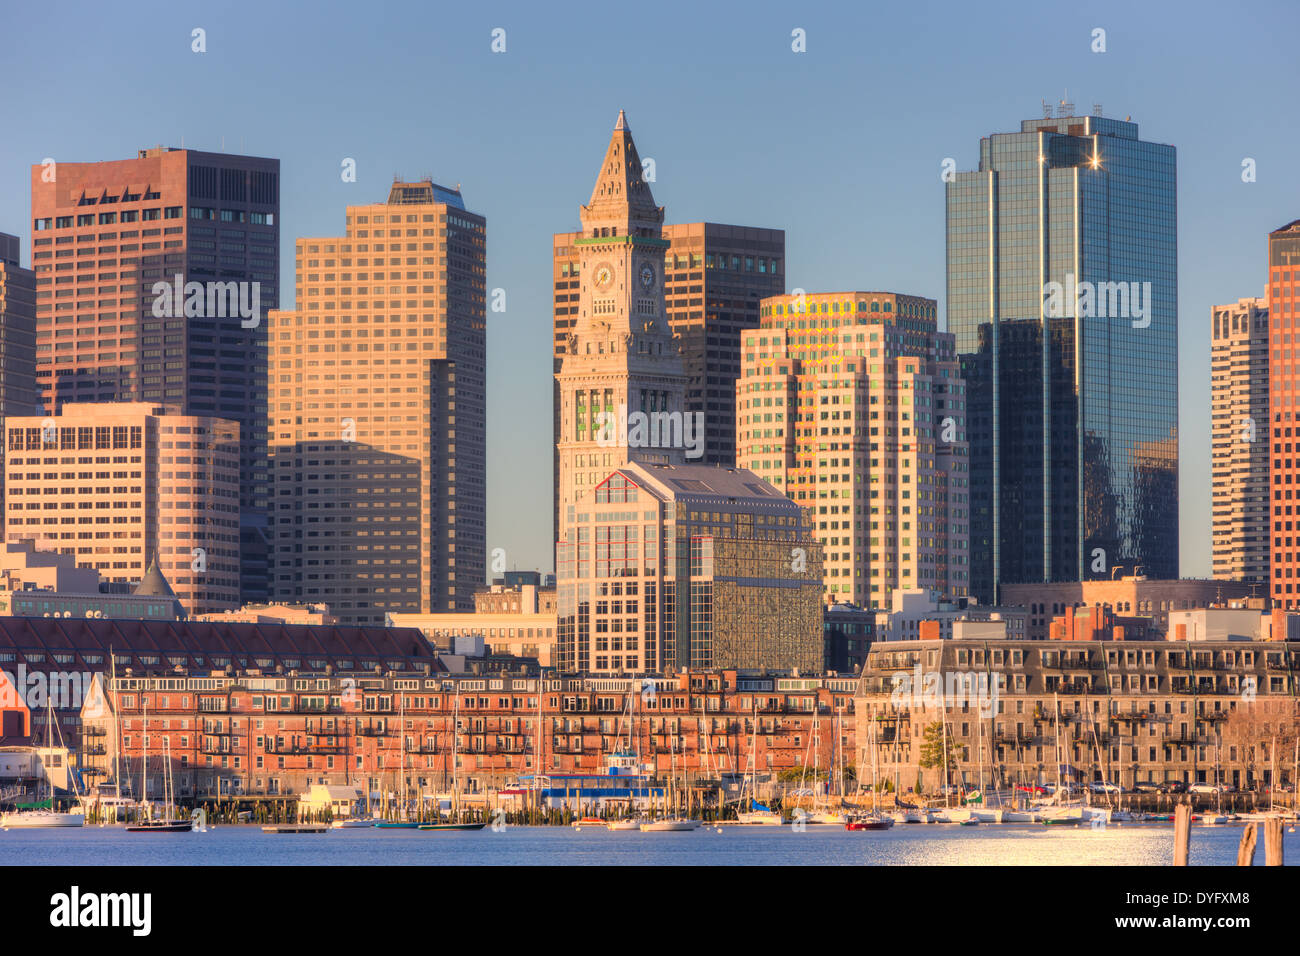 A morning view of the Custom House Tower, the Financial District, and low rise wharves on the waterfront in Boston, Massachusetts. Stock Photo